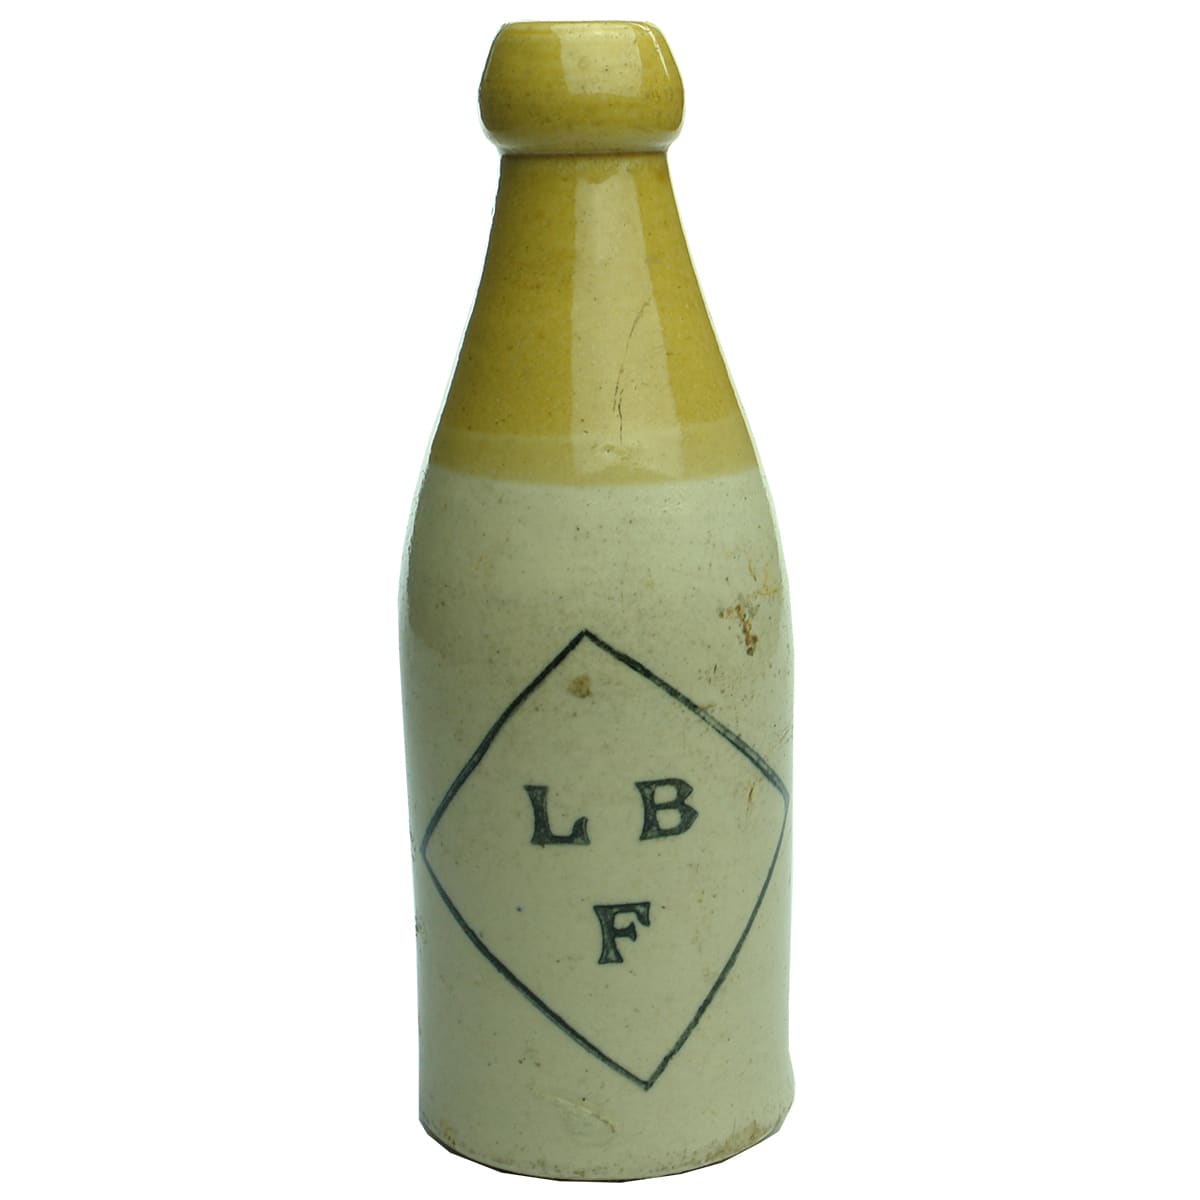 Ginger Beer. L B F in a Diamond. Champagne. Tan Top. (Lance Bullock or Lachlan Brewery, Forbes, New South Wales)